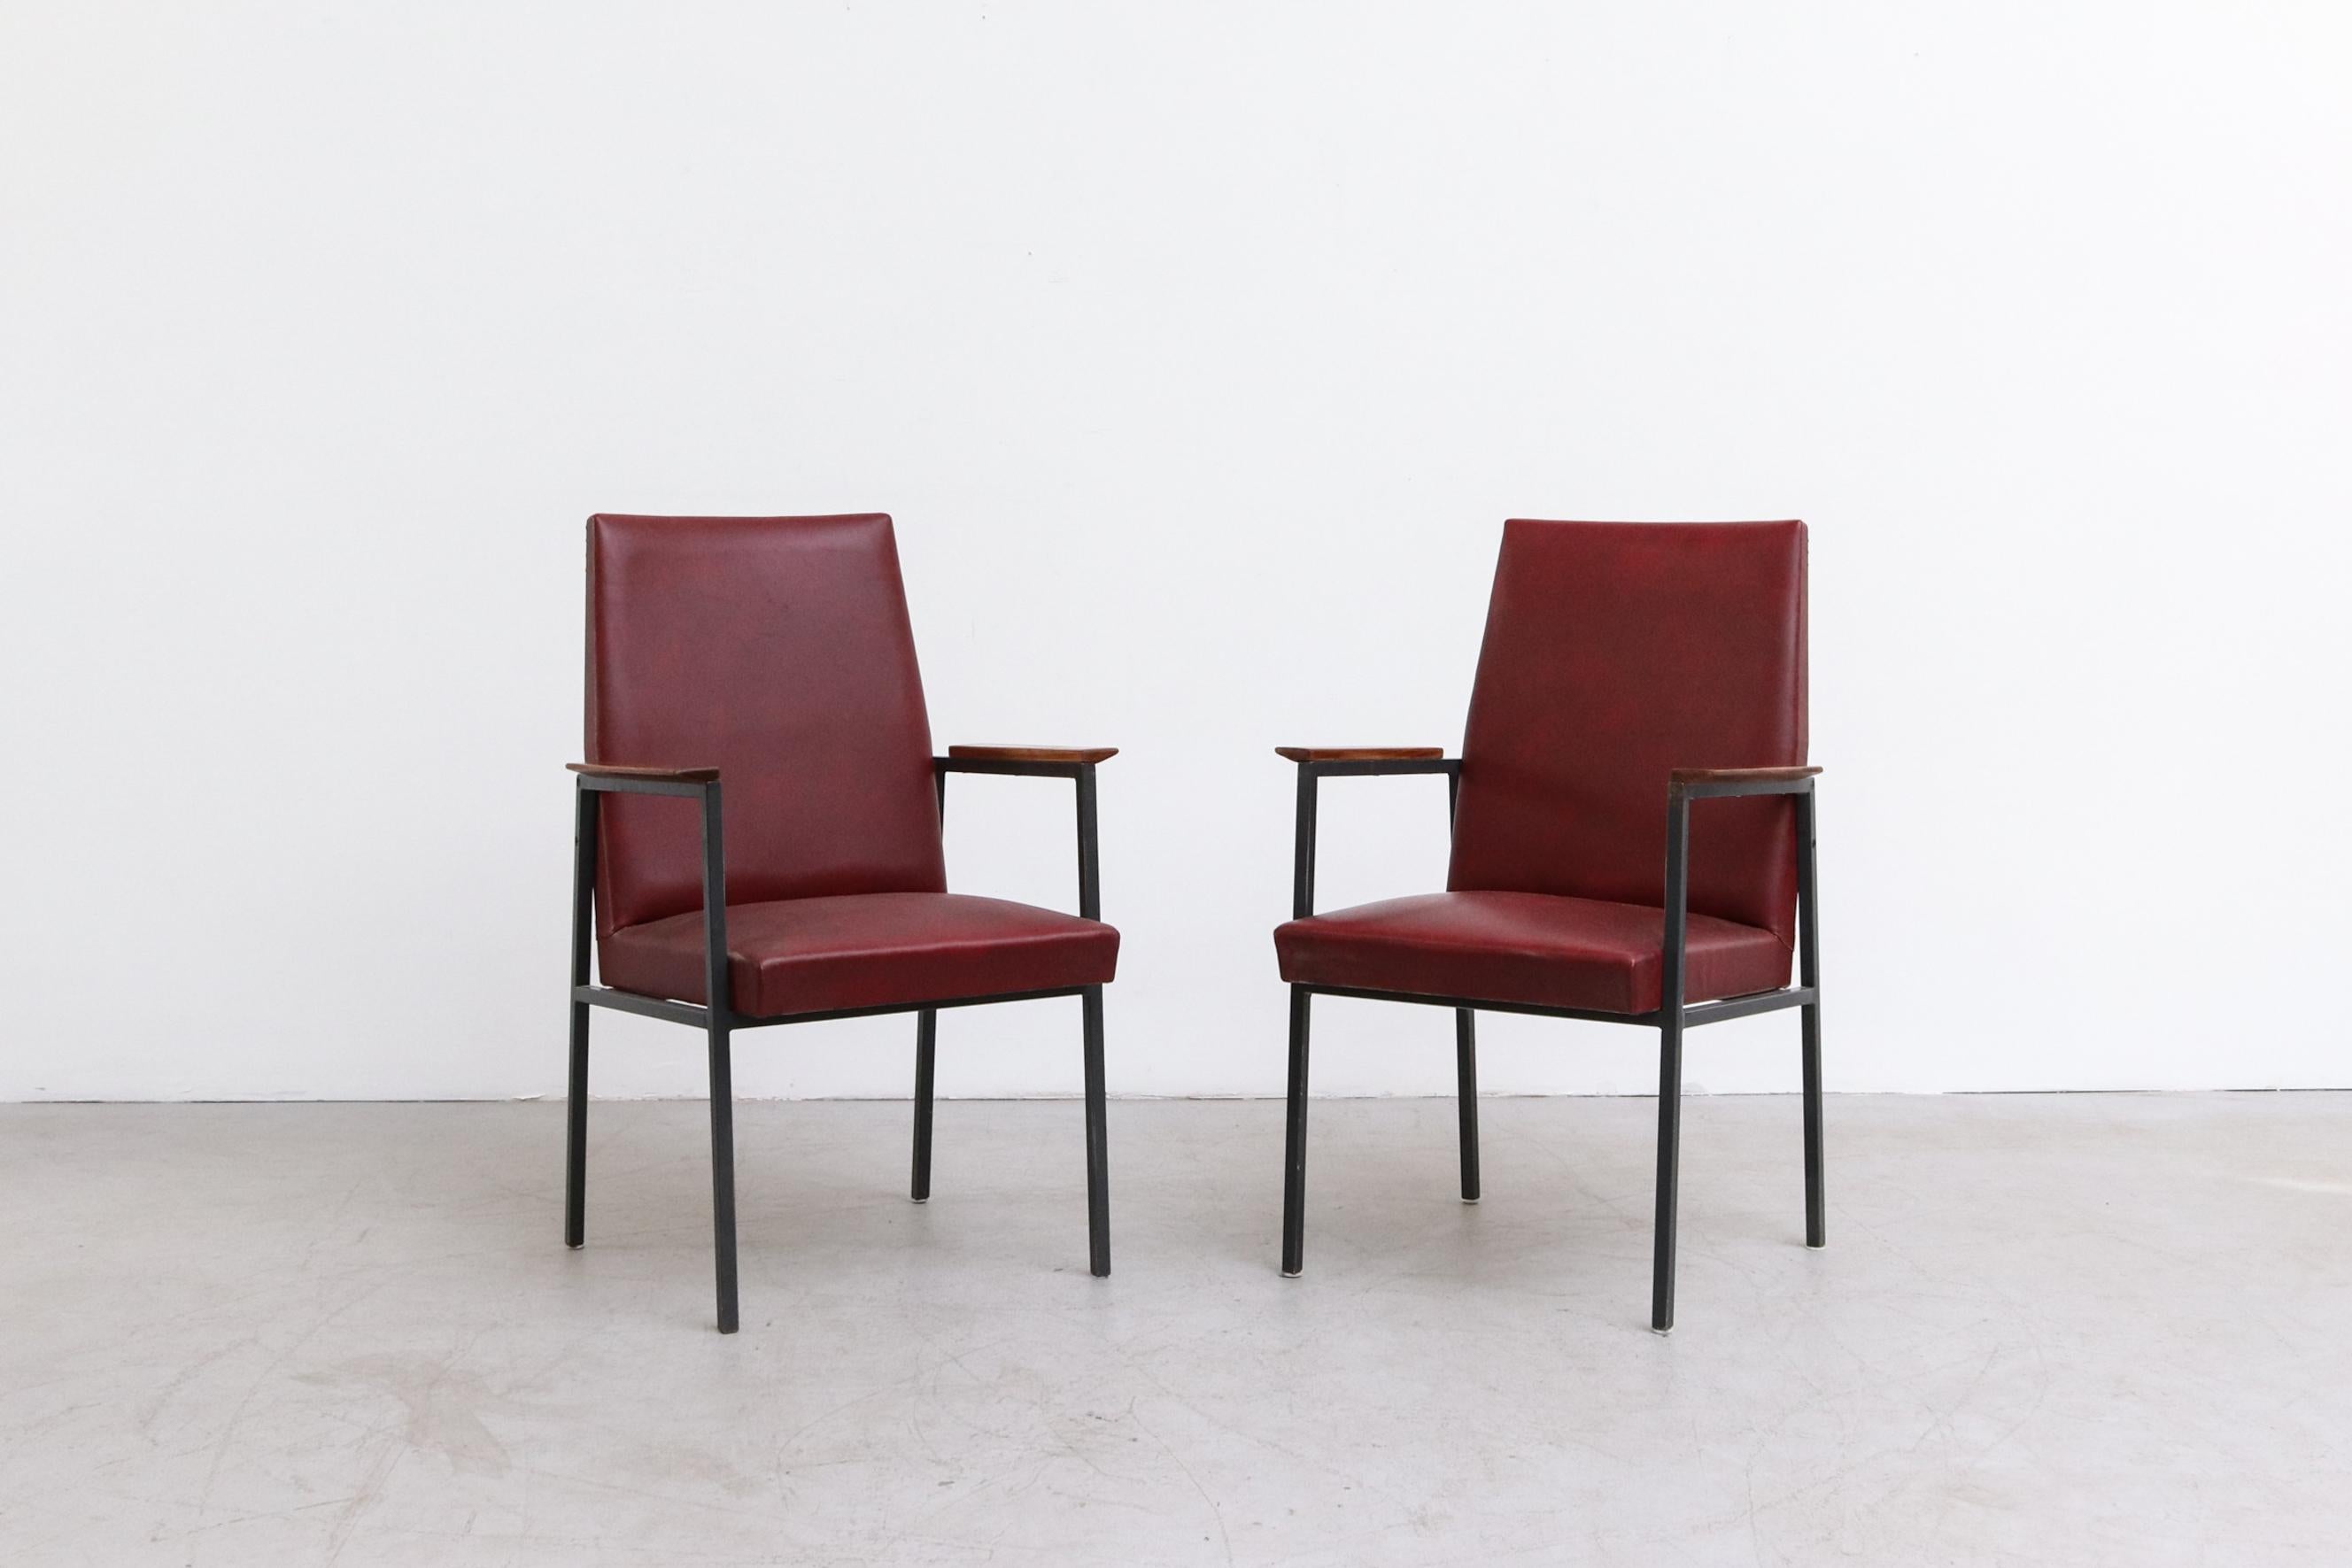 High back Tijsselling lounge chairs with enameled metal frame, teak armrests and original burgundy skai upholstery and red studded detail. Measure: Seat width is 19.5